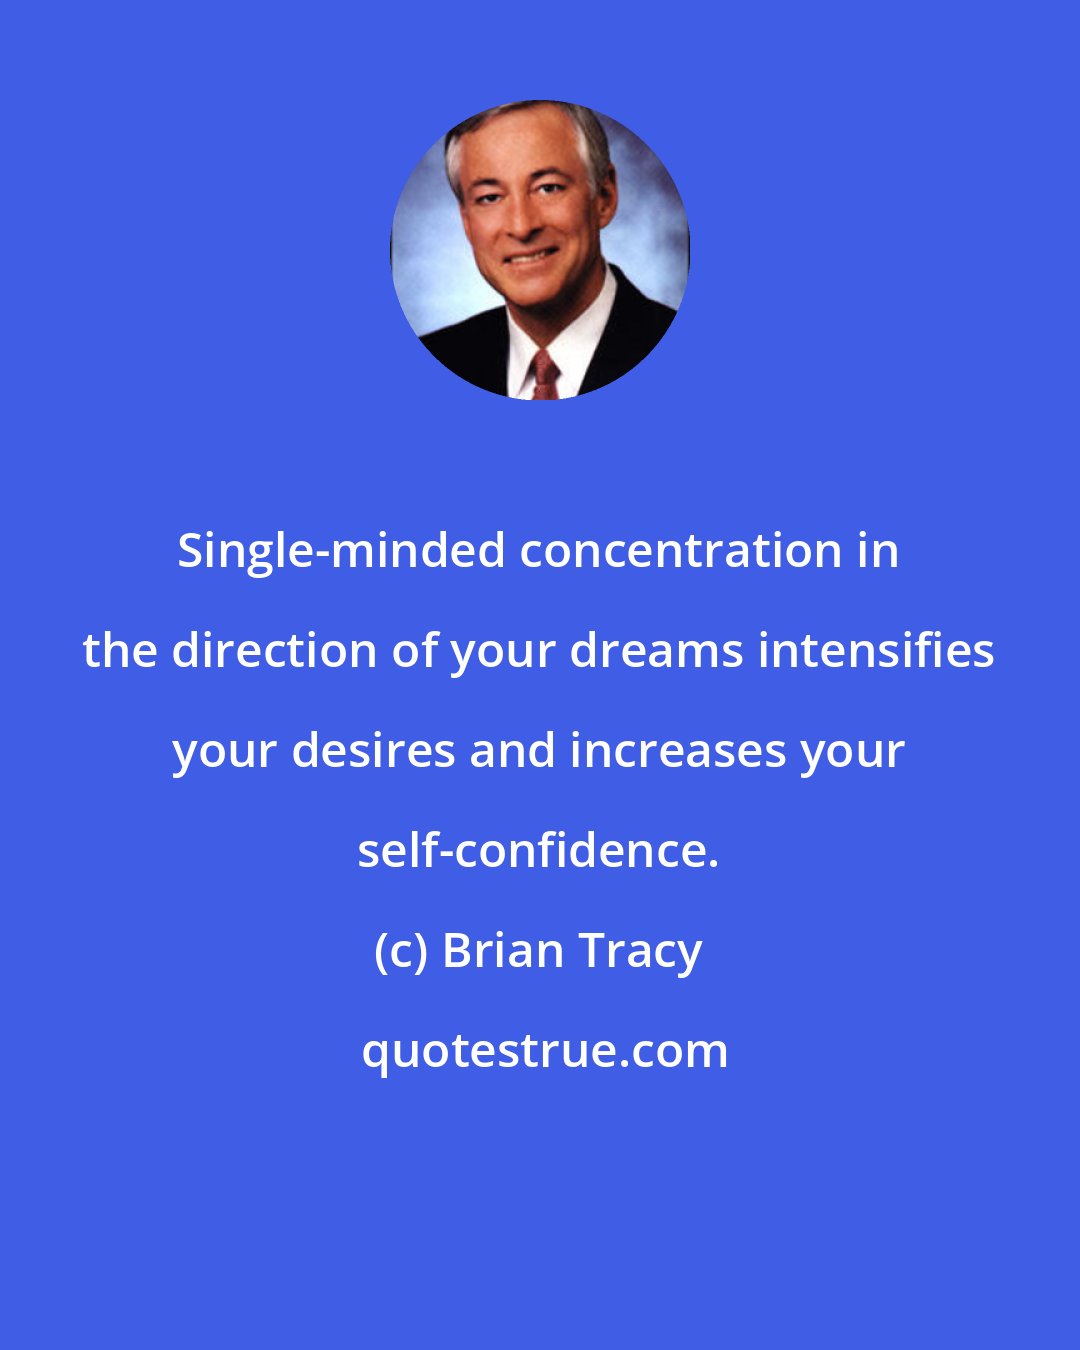 Brian Tracy: Single-minded concentration in the direction of your dreams intensifies your desires and increases your self-confidence.